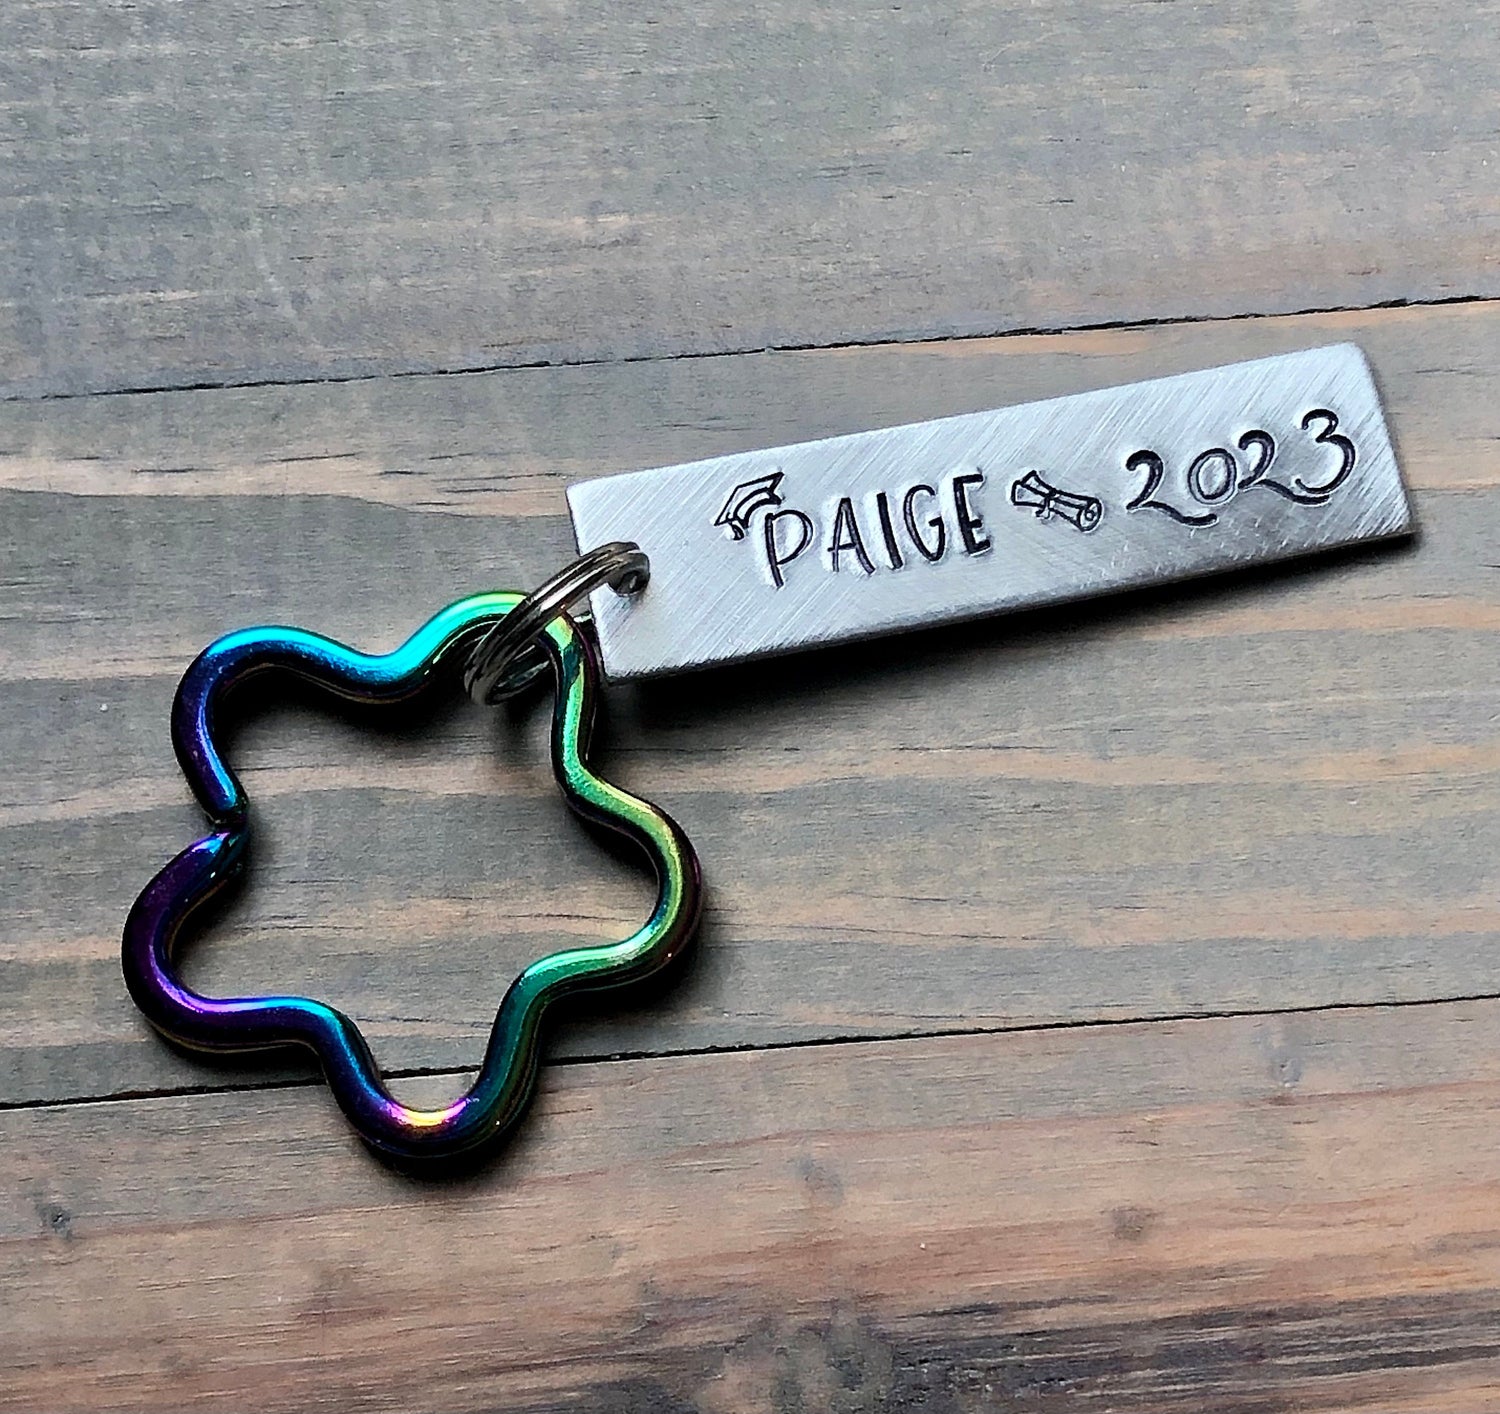 Graduation Gift, Personalized Keychain for Graduation, Class of 2023 Gift, Custom Keychain for Car gift, High School, College